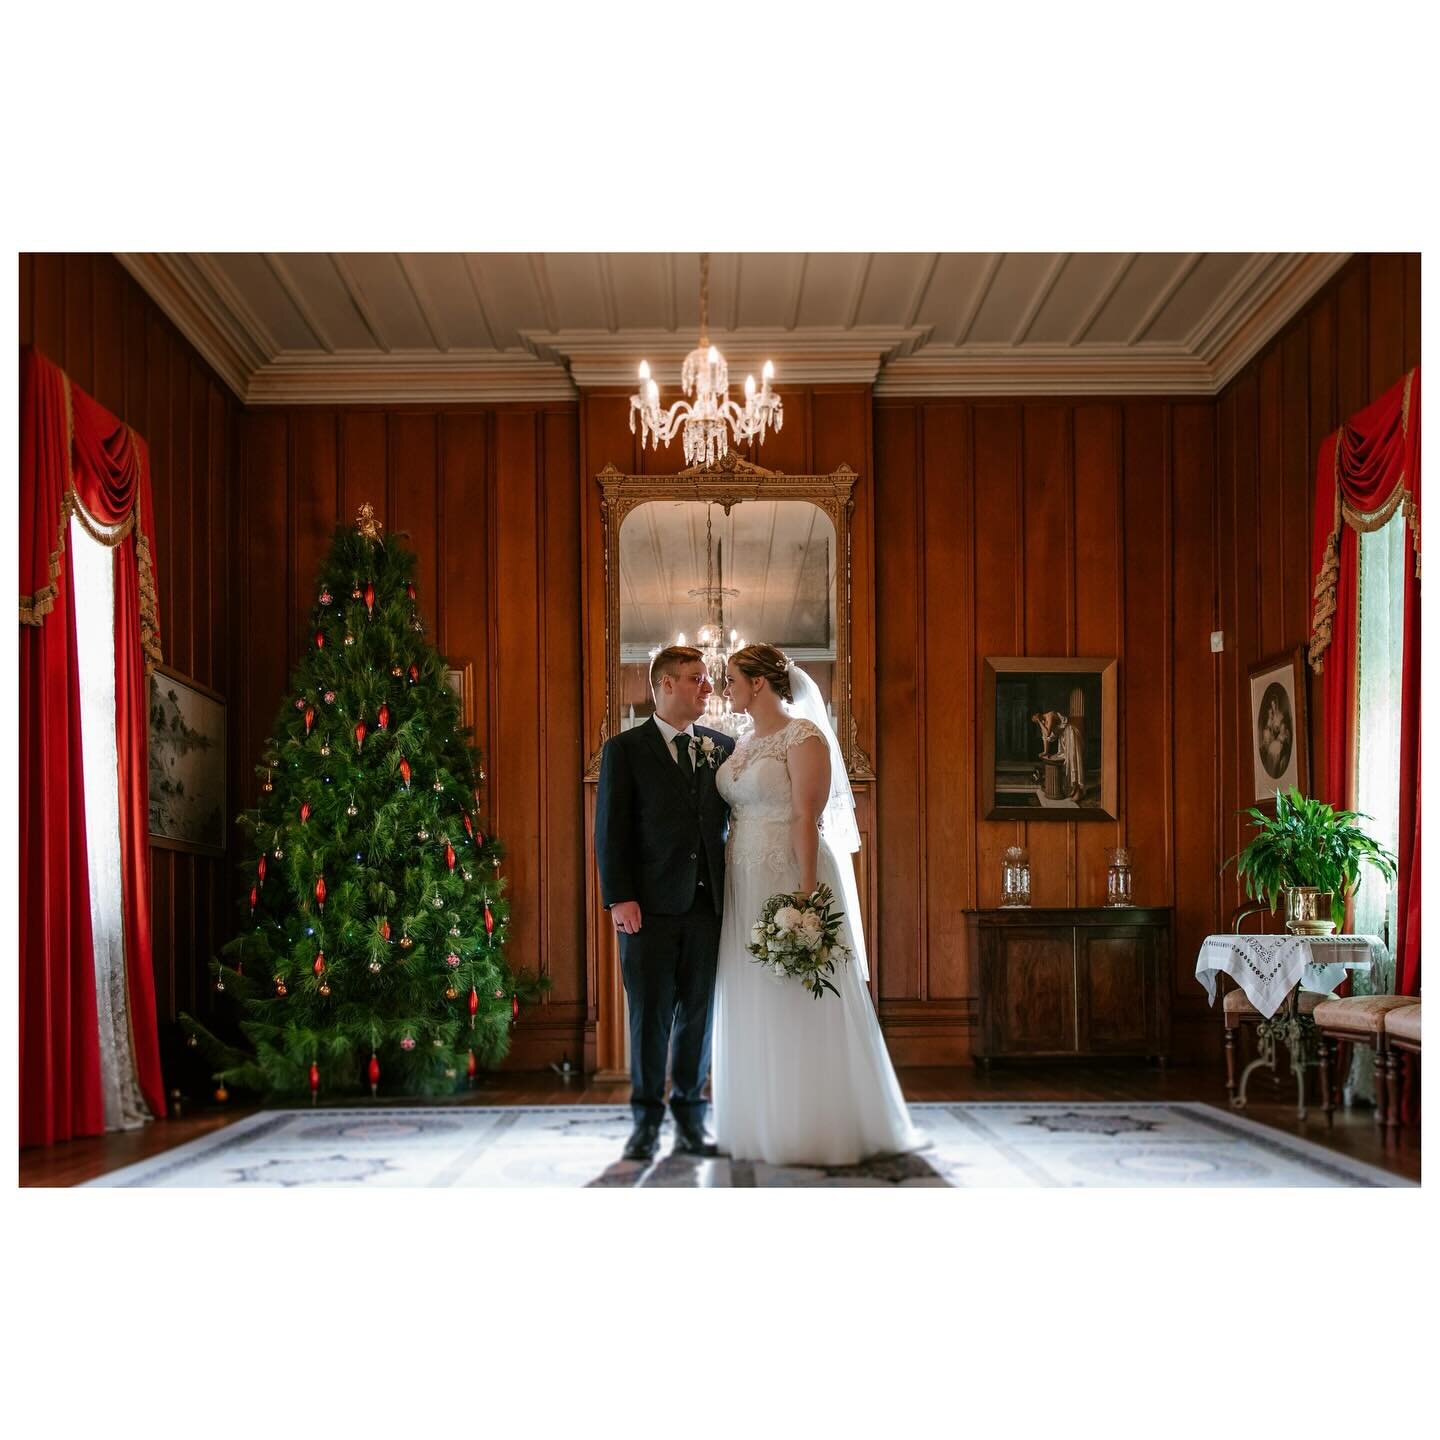 It&rsquo;s Christmas time - so where better to show a pic from from stunning #highwic where Courtney and Thomas were married a year ago! 
5 December 2022 #05122022
🎄
They sure do know how to do #christmas at @highwic1862